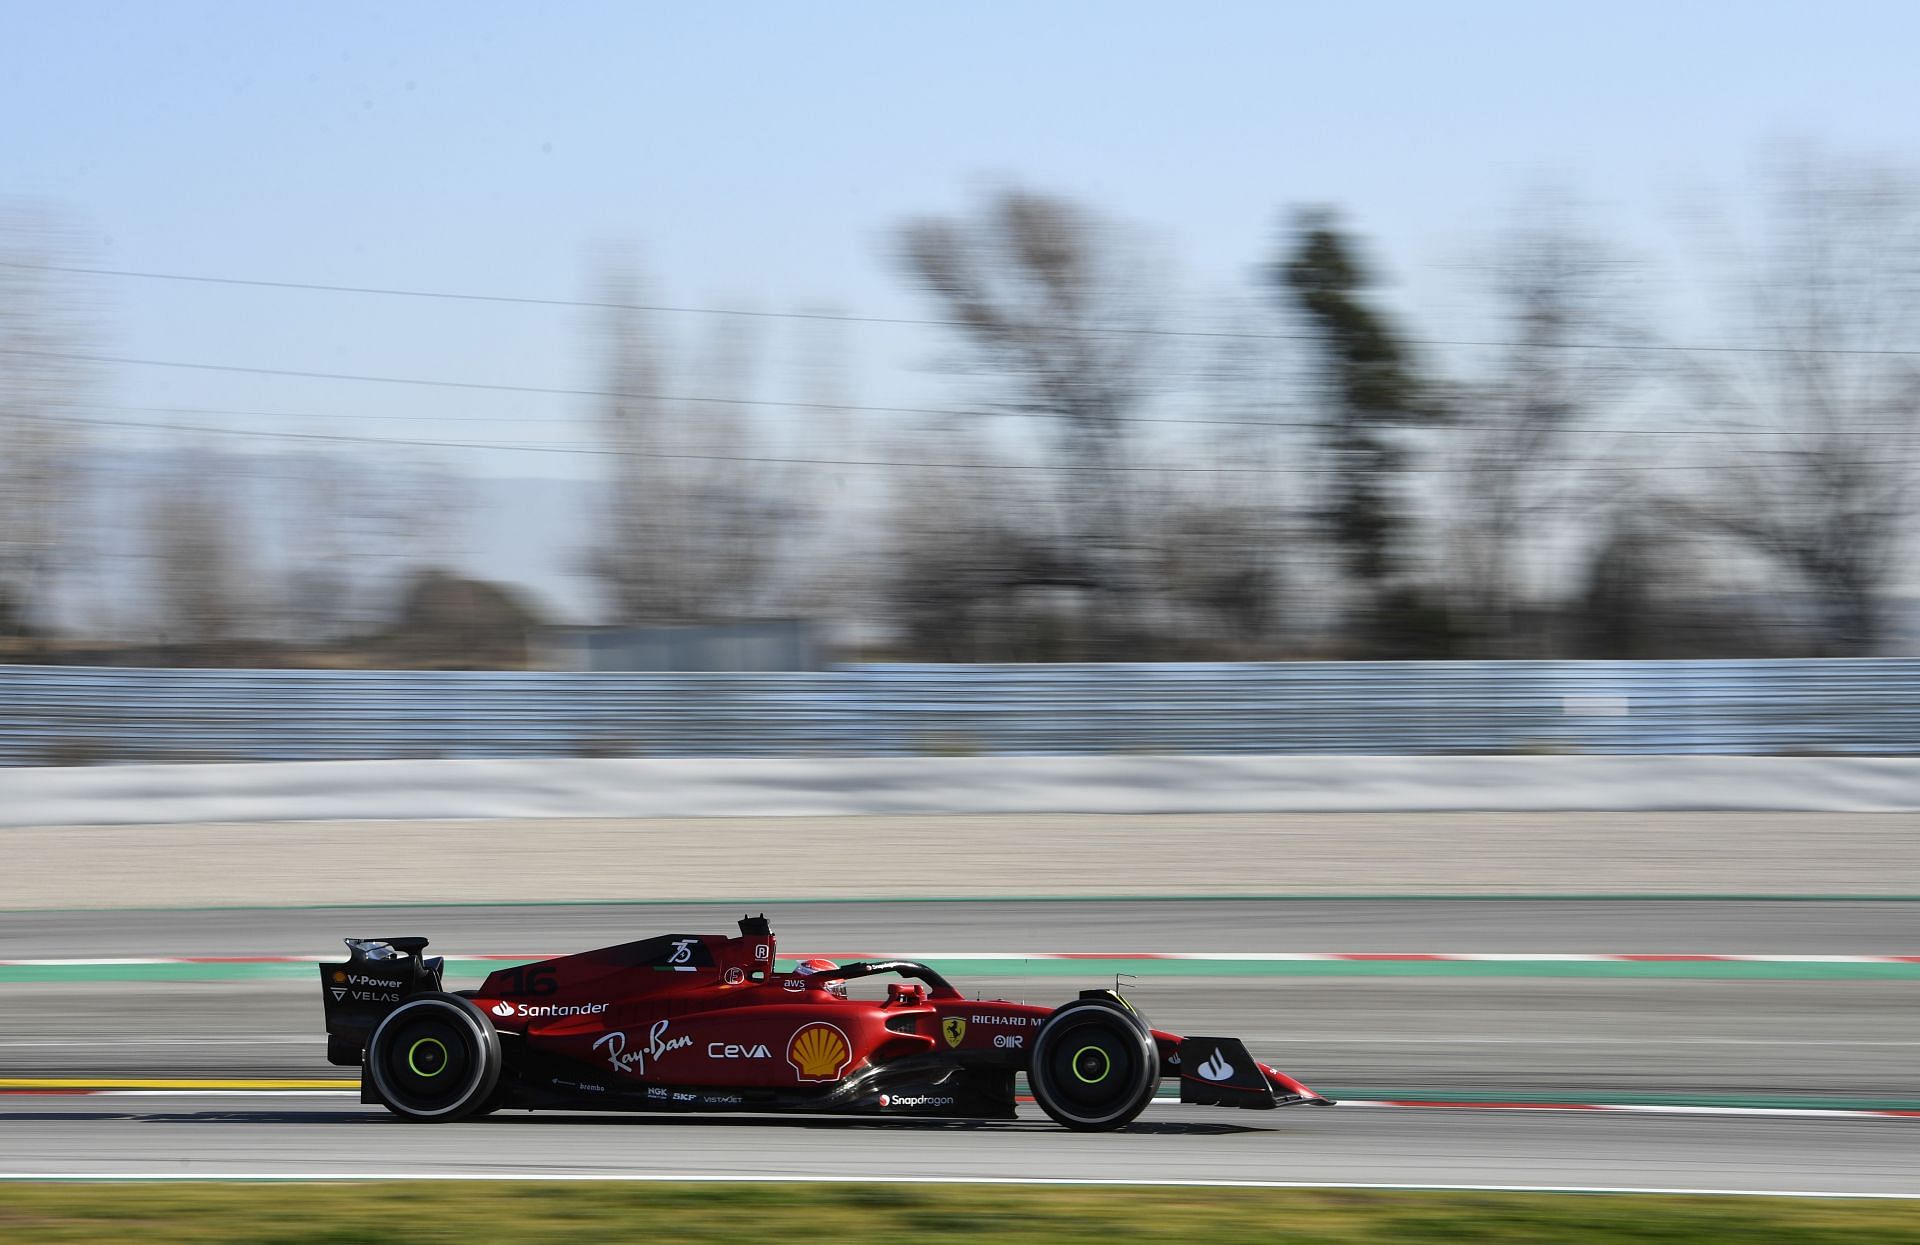 Ferrari&#039;s Charles Leclerc in action during the first day of pre-season testing in Barcelona (Photo by Rudy Carezzevoli/Getty Images)